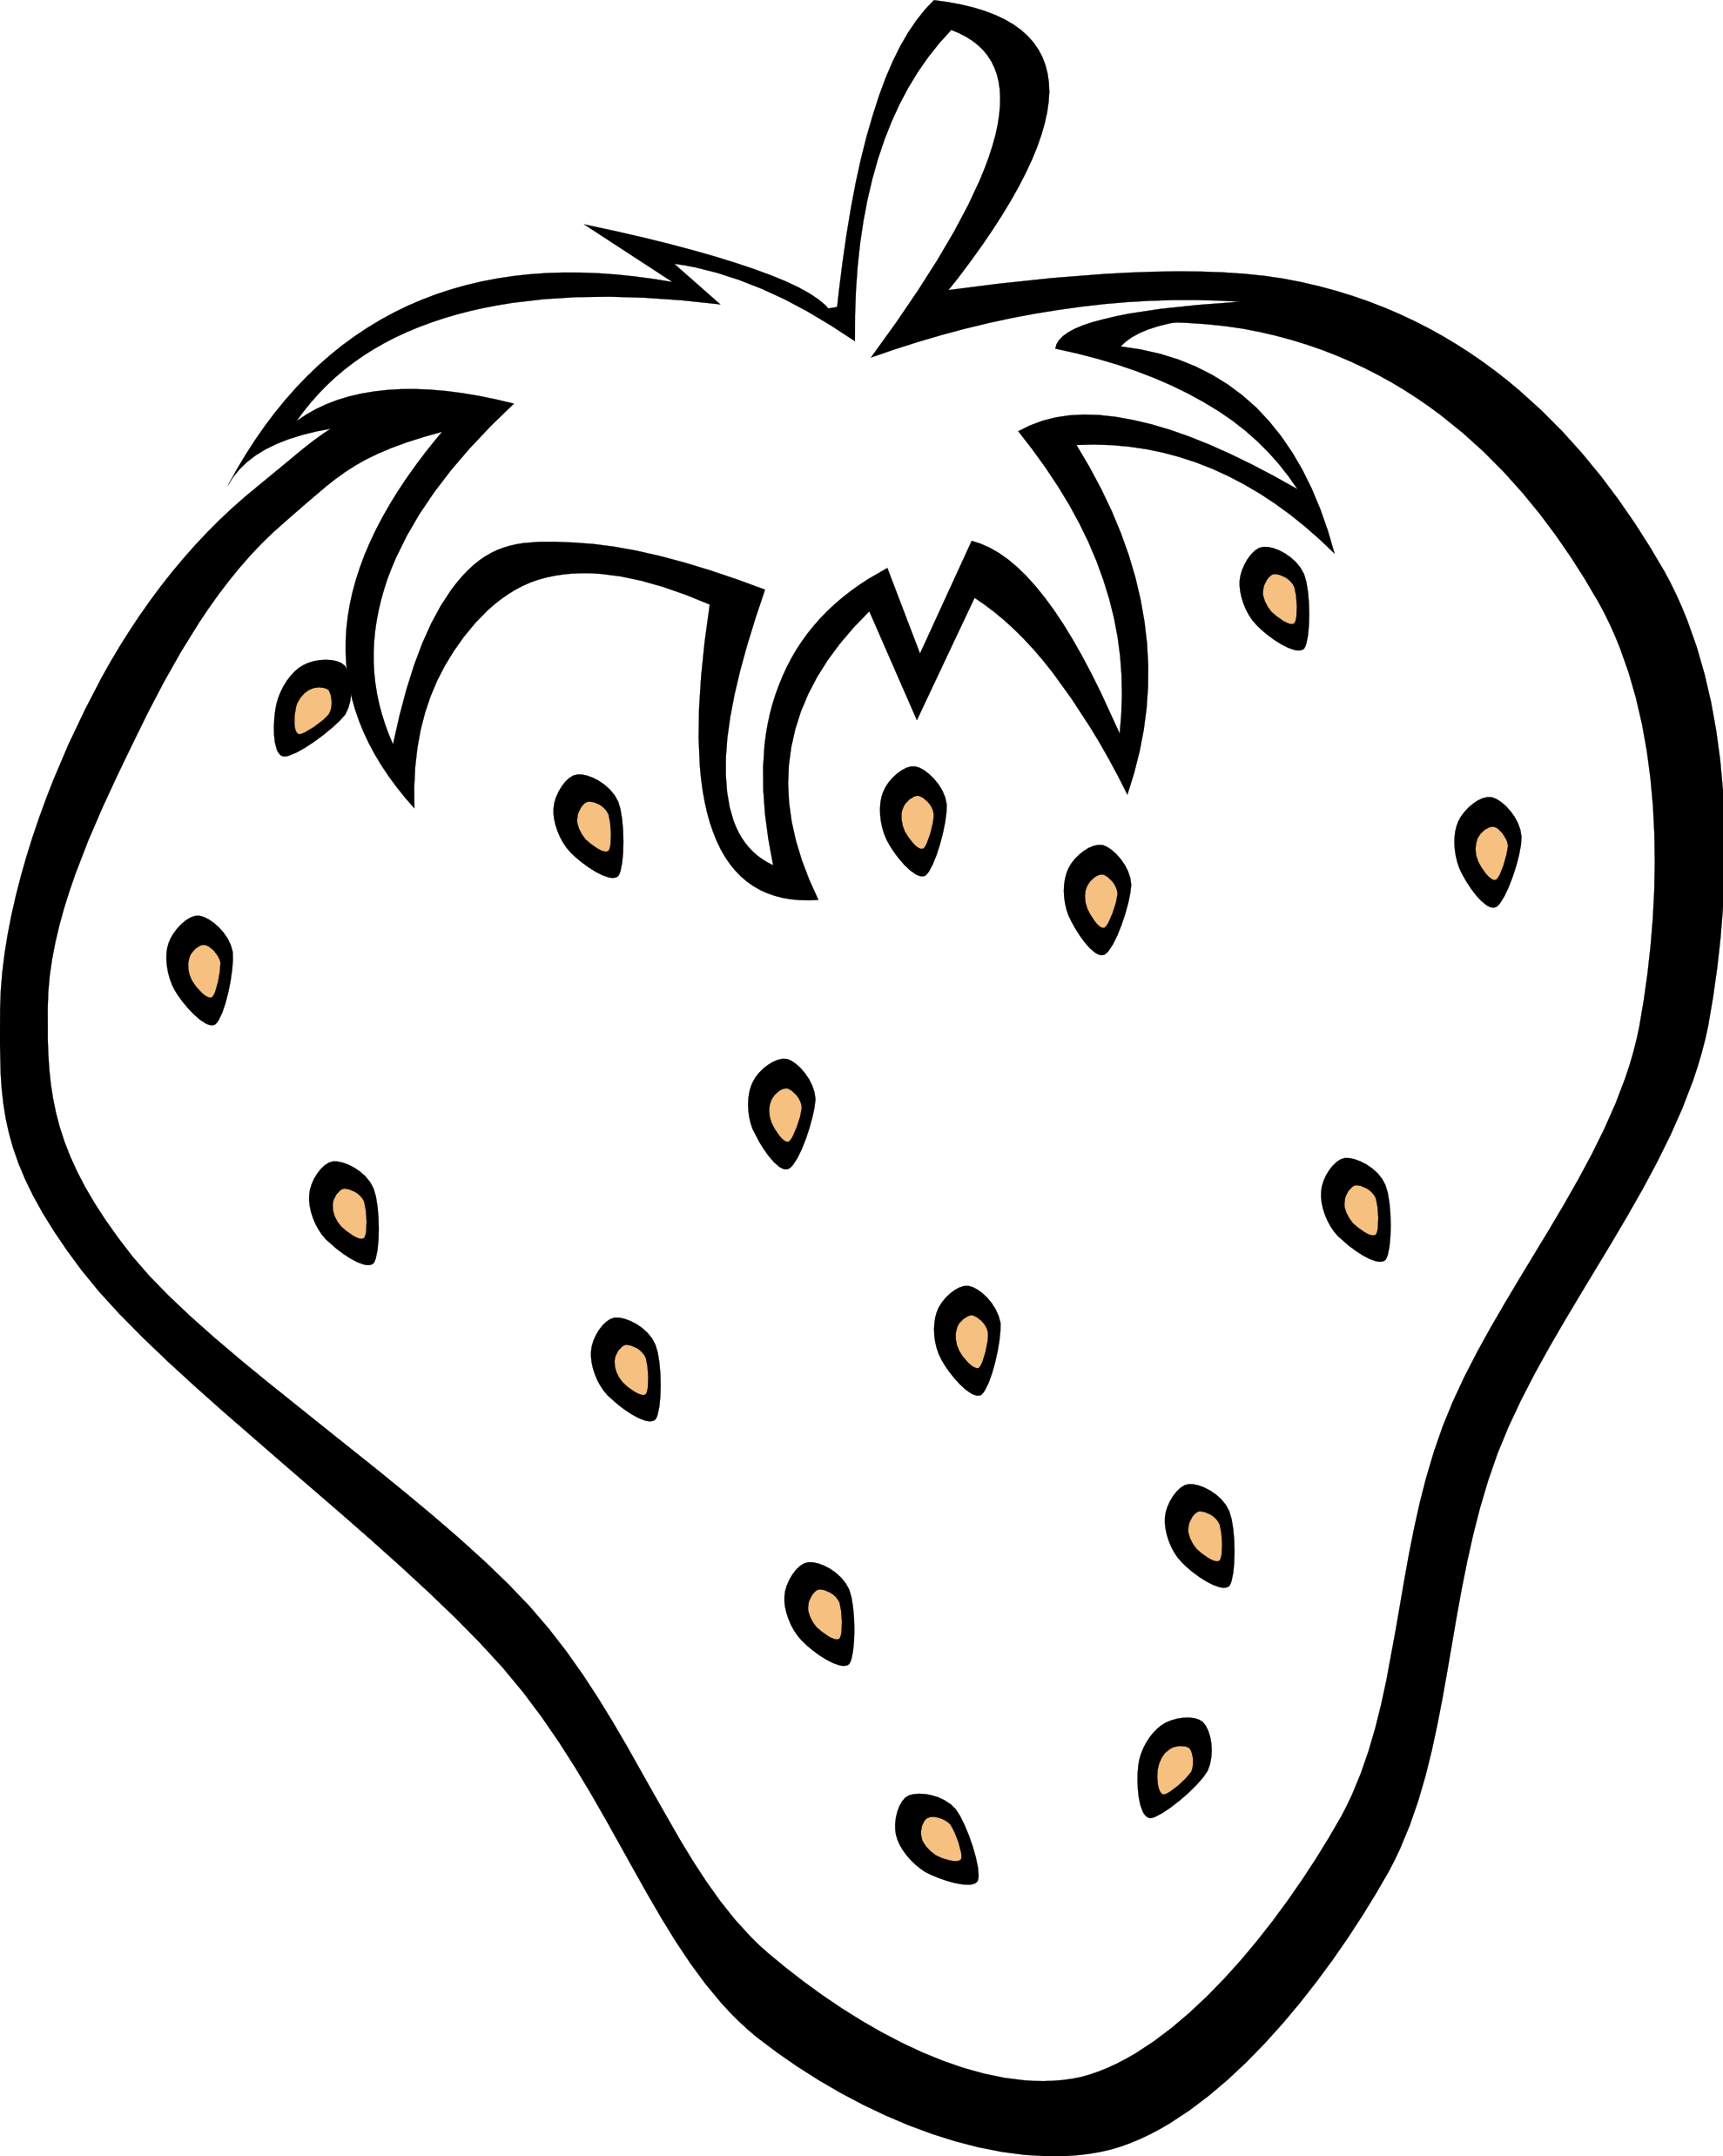 Black And White Pictures Of Fruit - ClipArt Best